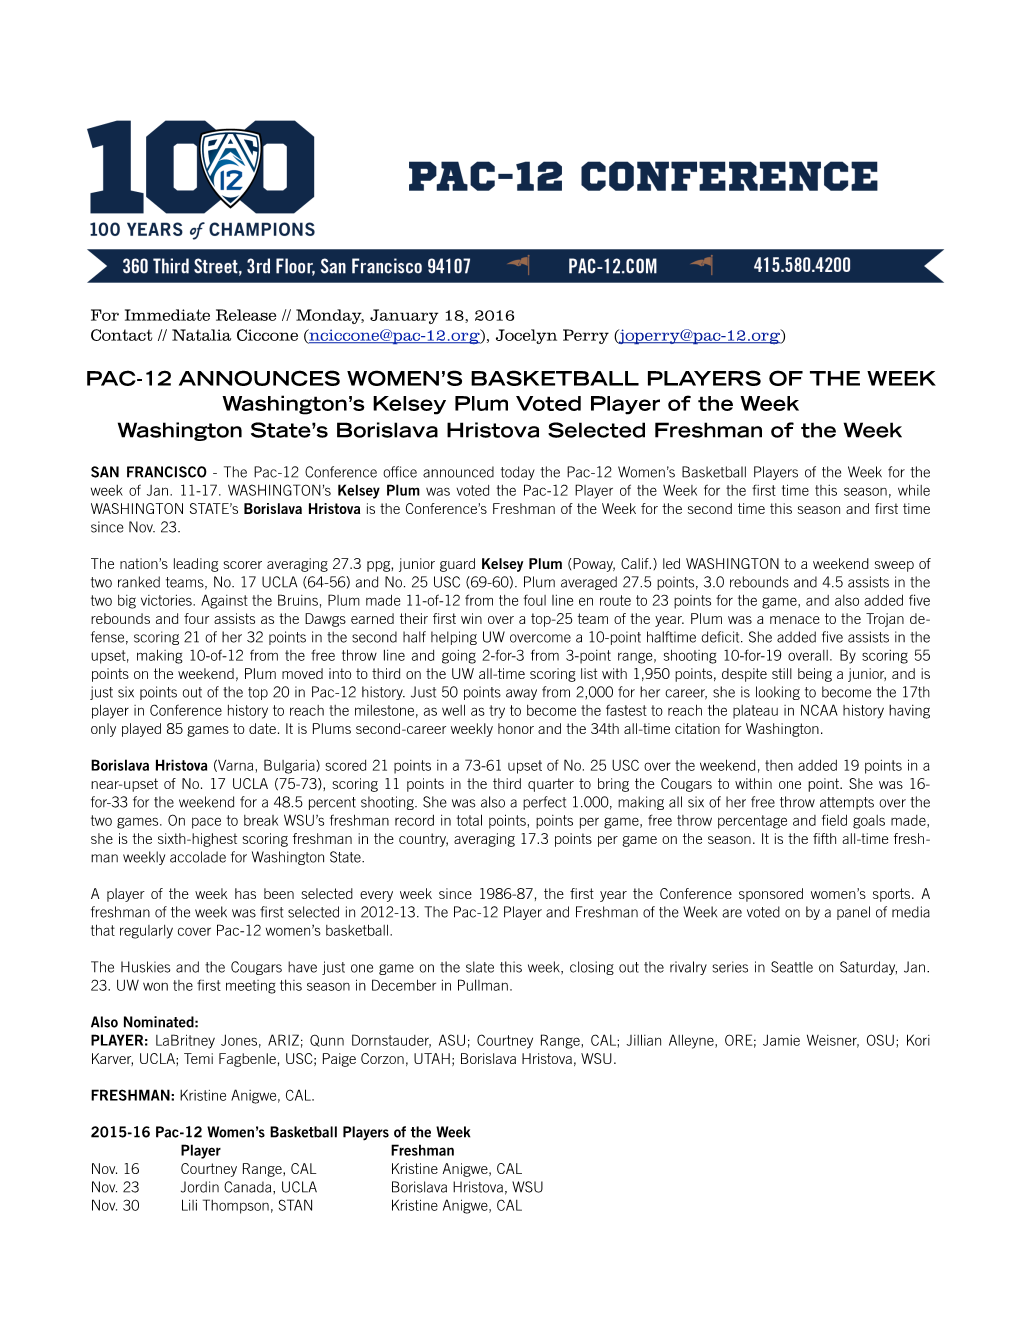 Pac-12 Announces Women's Basketball Players of The